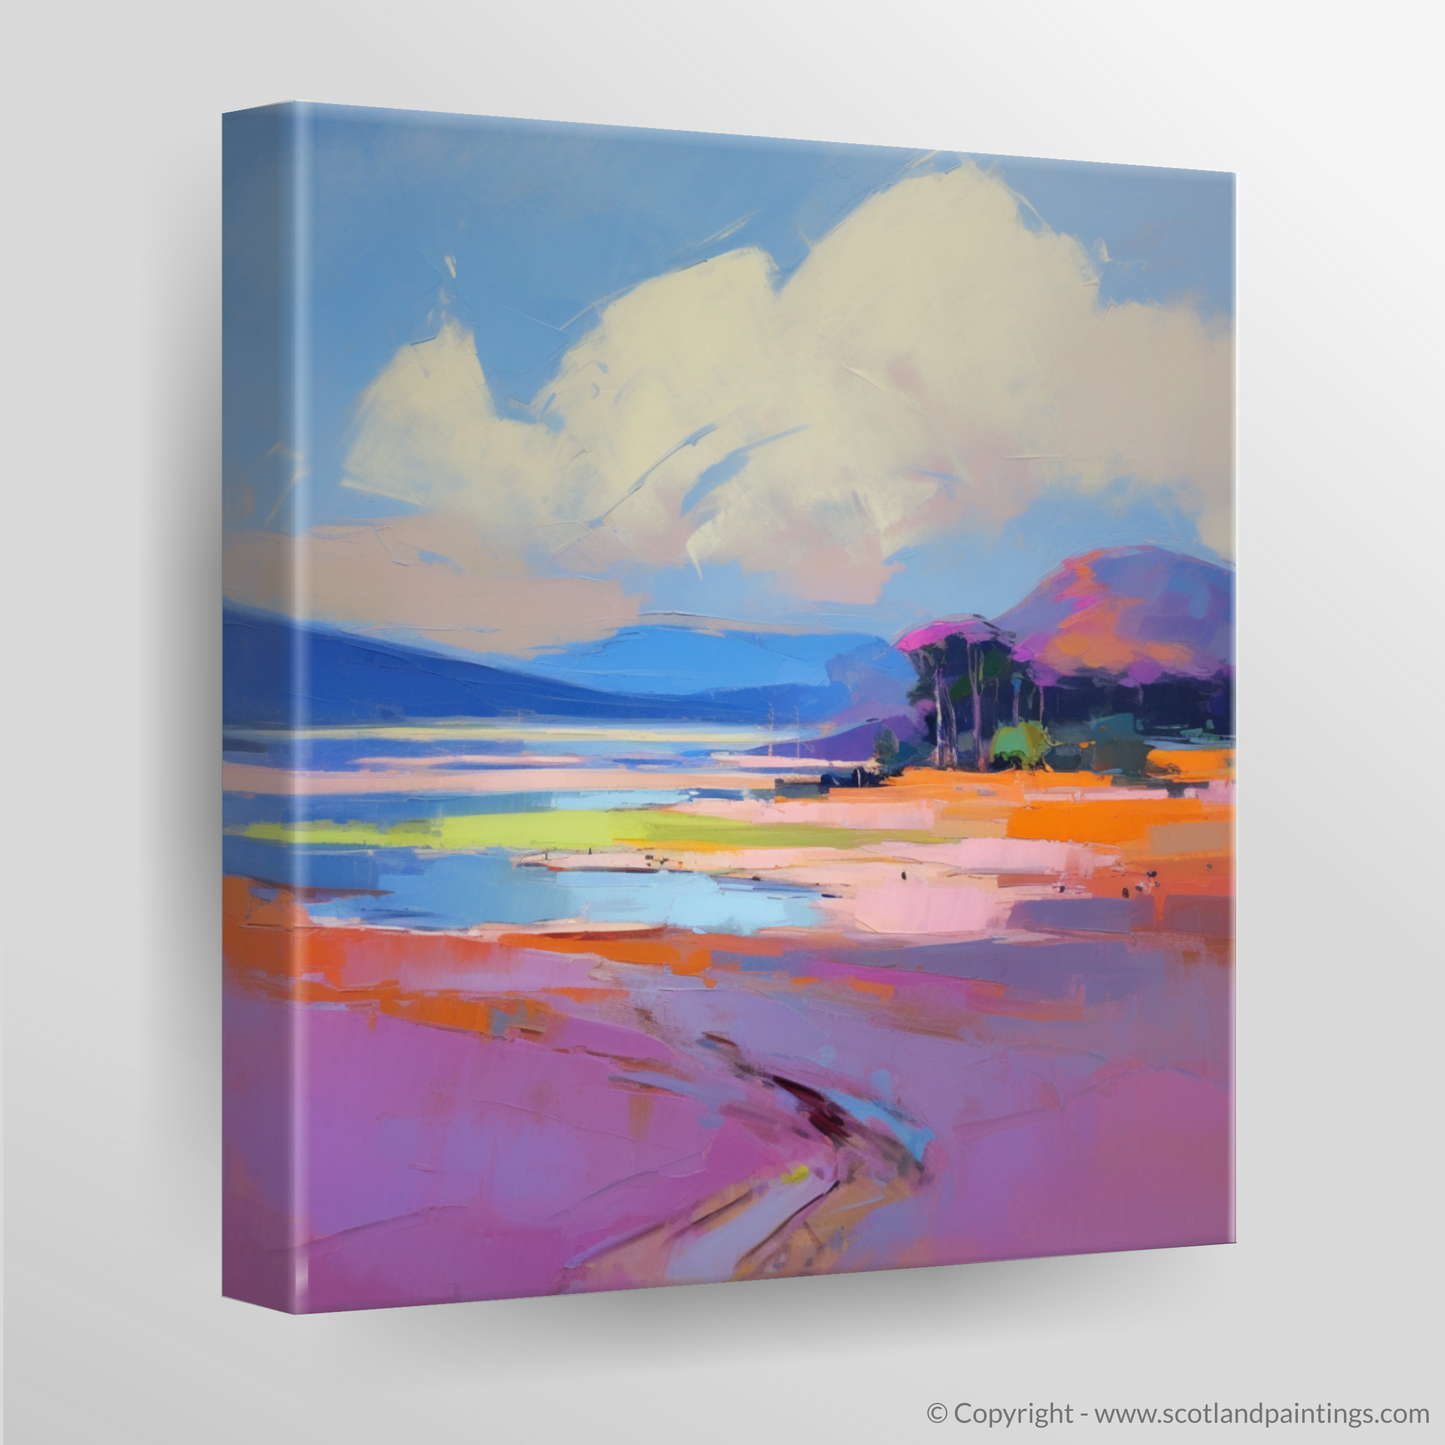 Nairn Beach Enchantment: An Expressionist Journey